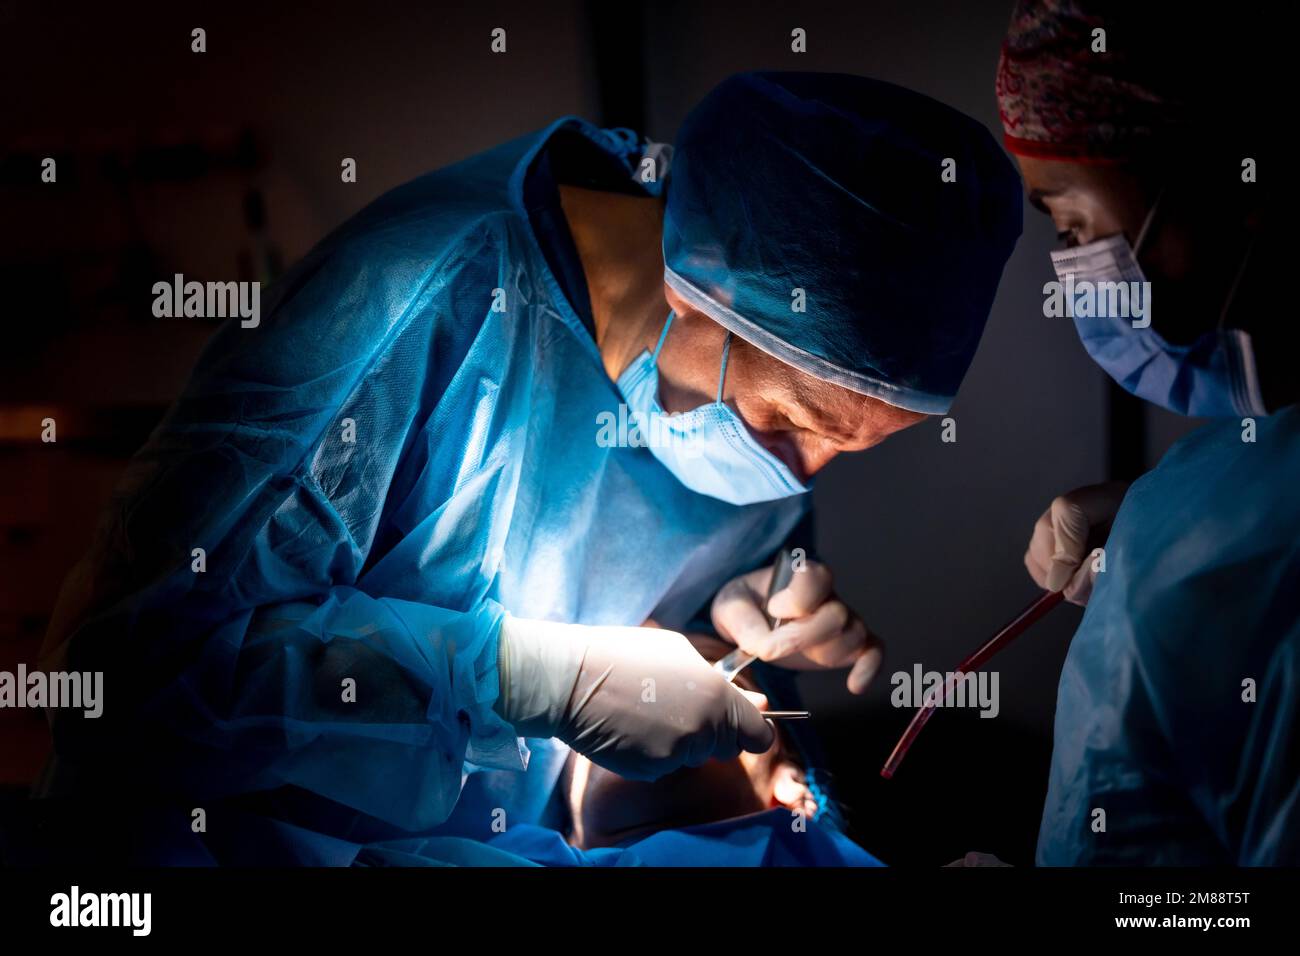 Dental clinic, dentist doctor and the assistant performing an oral operation in low light Stock Photo